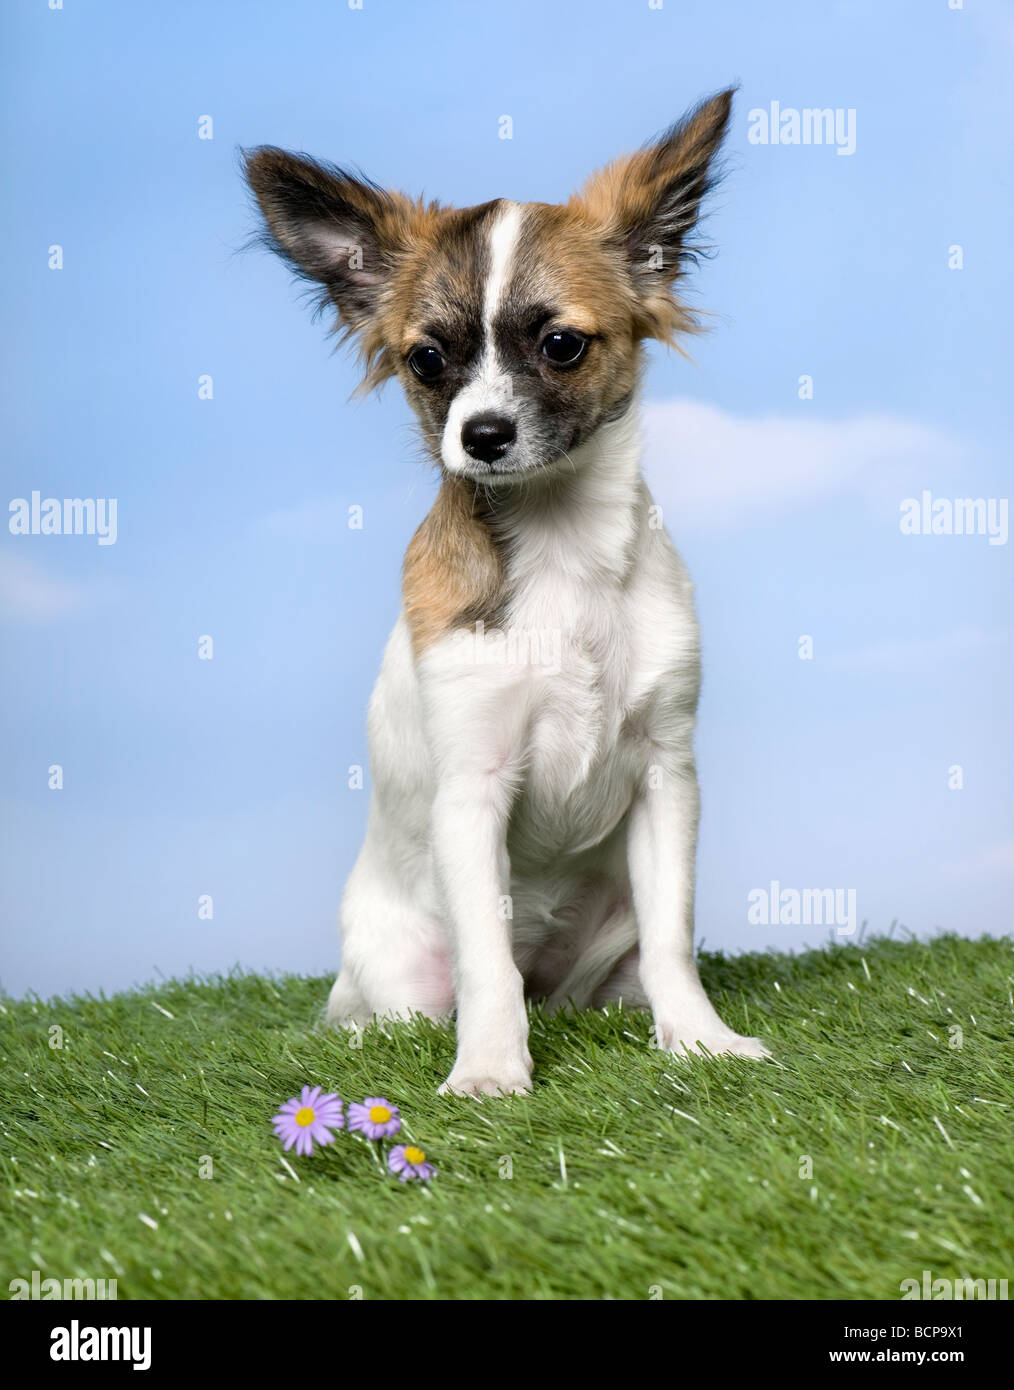 Chihuahua puppy sitting on grass against blue sky, studio shot Banque D'Images